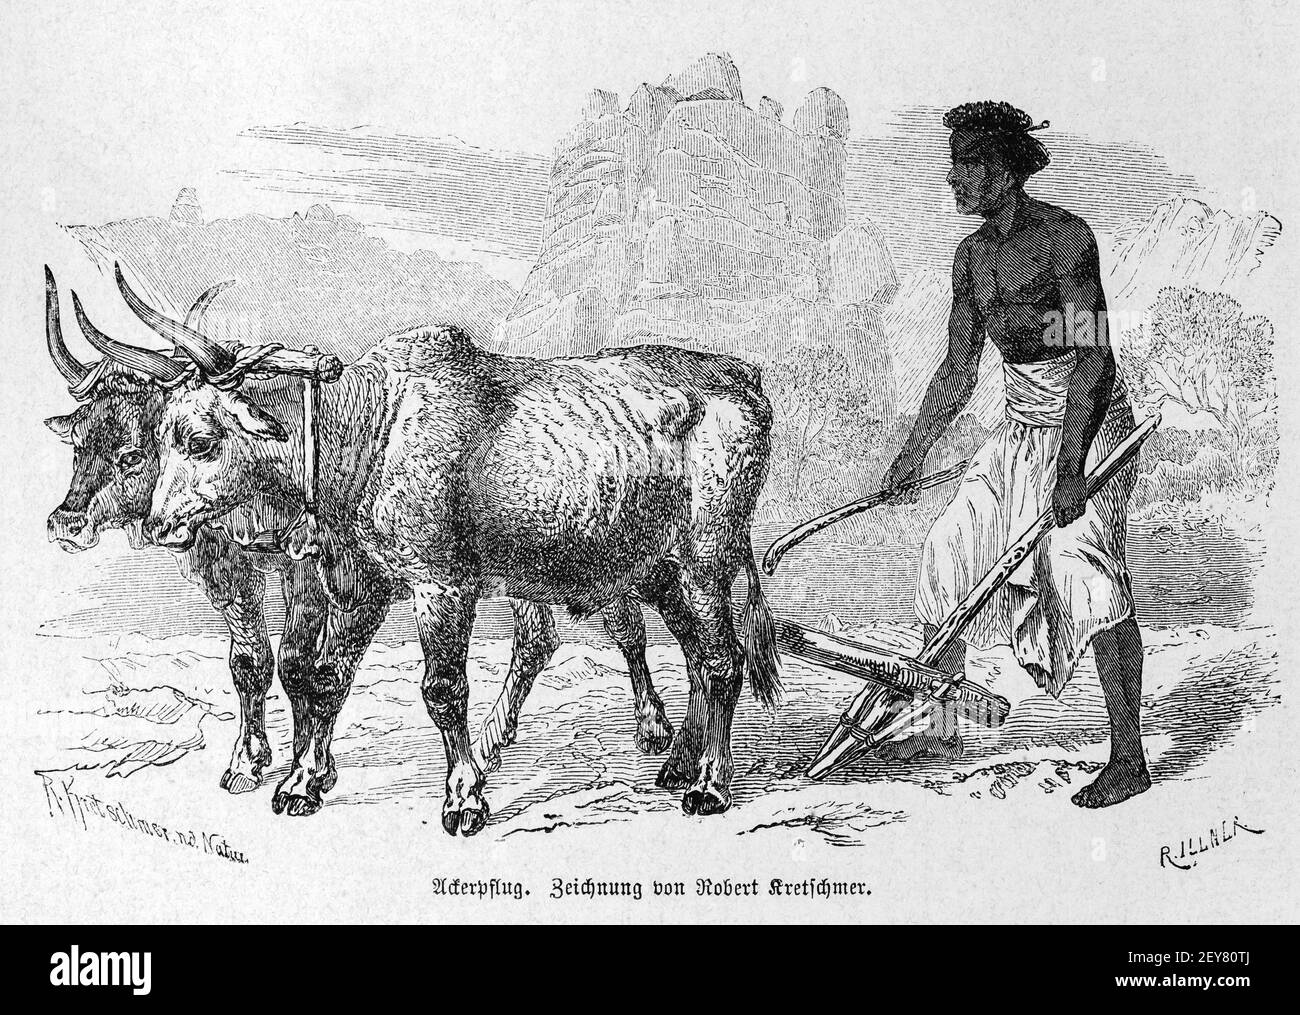 Ploughing a field  thr traditional way witha wooden plough and oxen, Dr. Richard Andree, Abessinien, Land und Volk, Leipzig 1869 Stock Photo